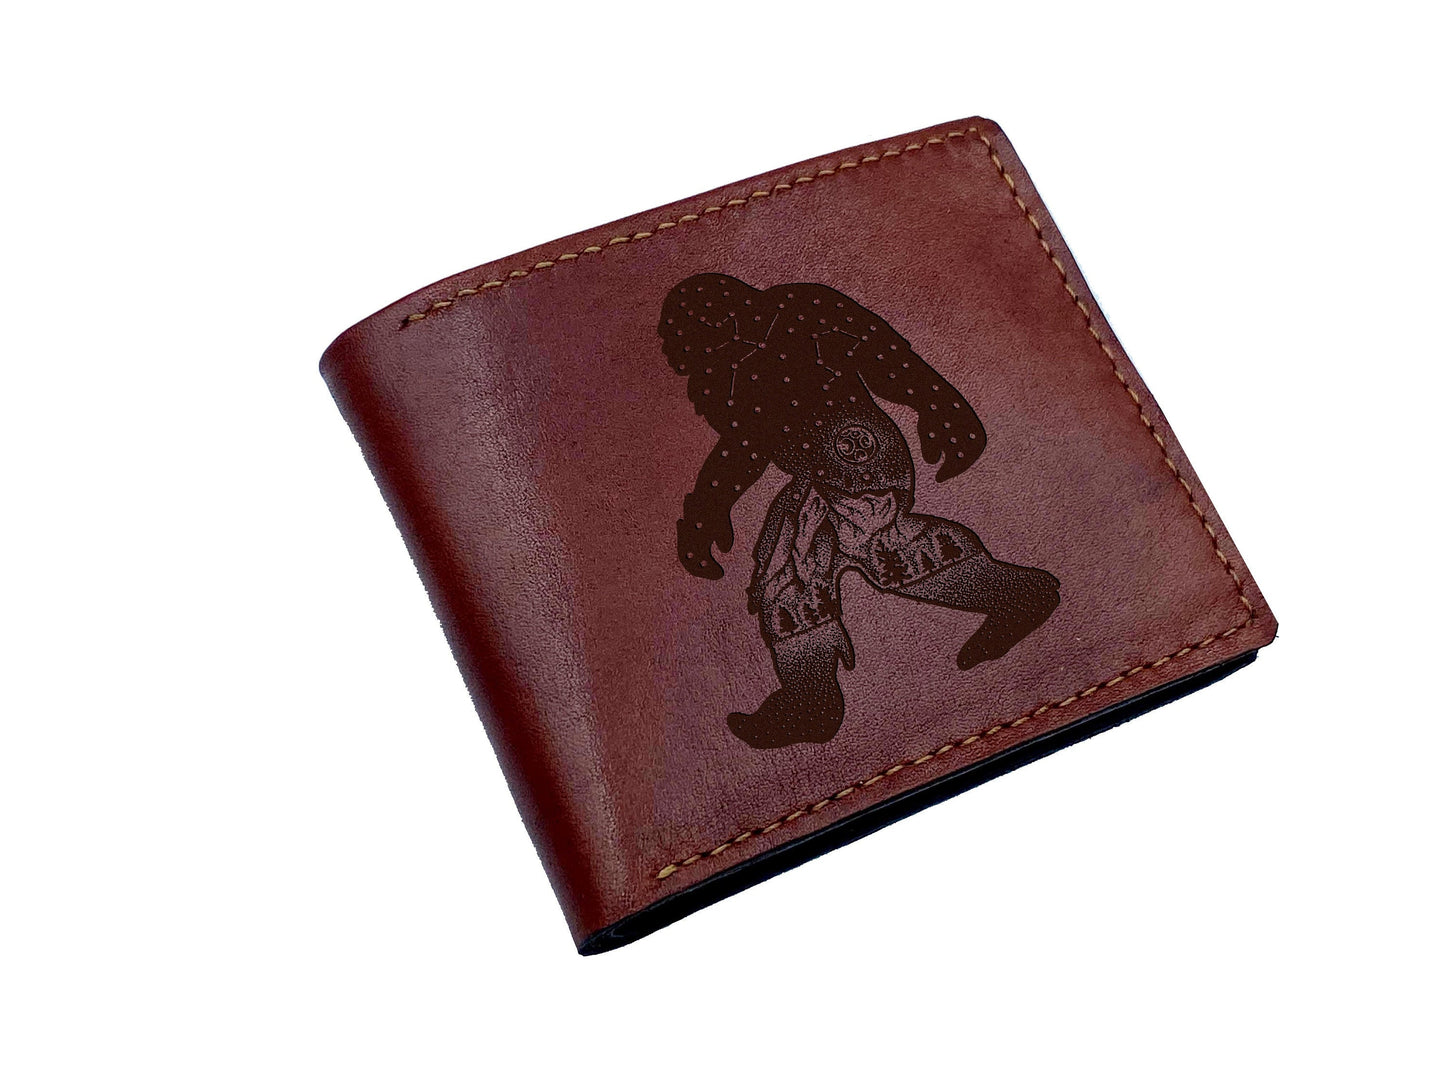 Bigfoot leather men's wallet, Sasquatch art leather gift for him, forest mythical creature wallet, custom cute monster gift for him